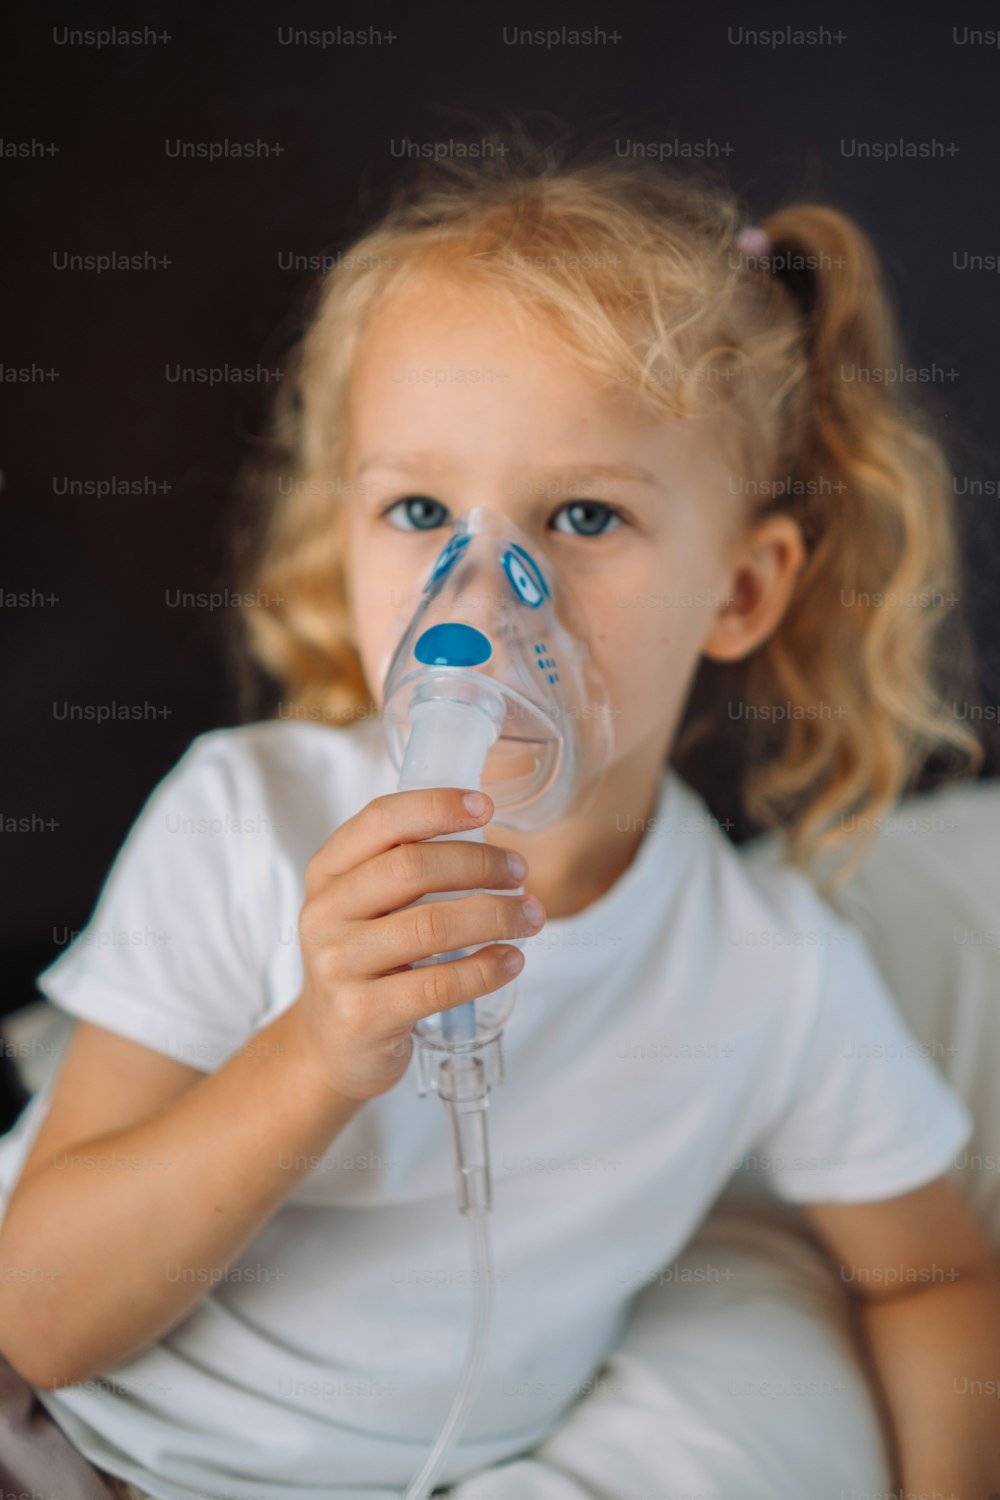 a little girl in a white shirt is holding an oxygen tube